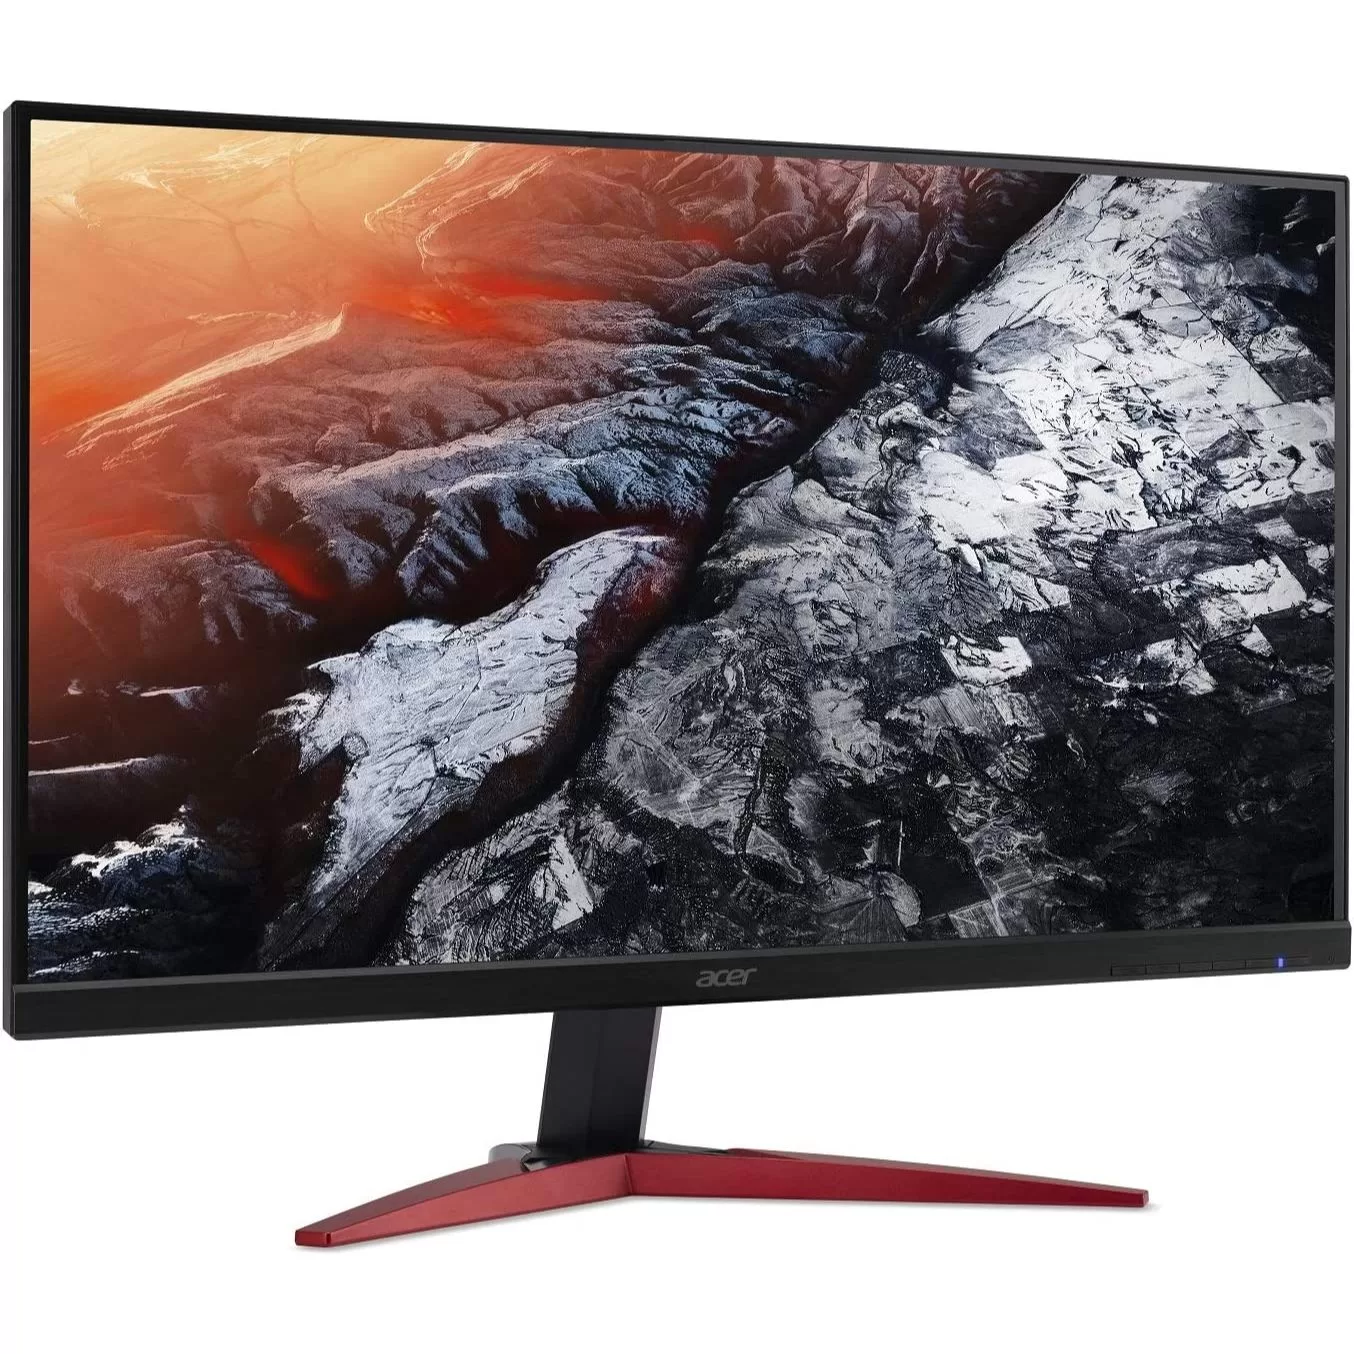 Acer LED Gaming Monitor, KG251Q, 25-inch, 165HZ and 1MS response time LCD 7